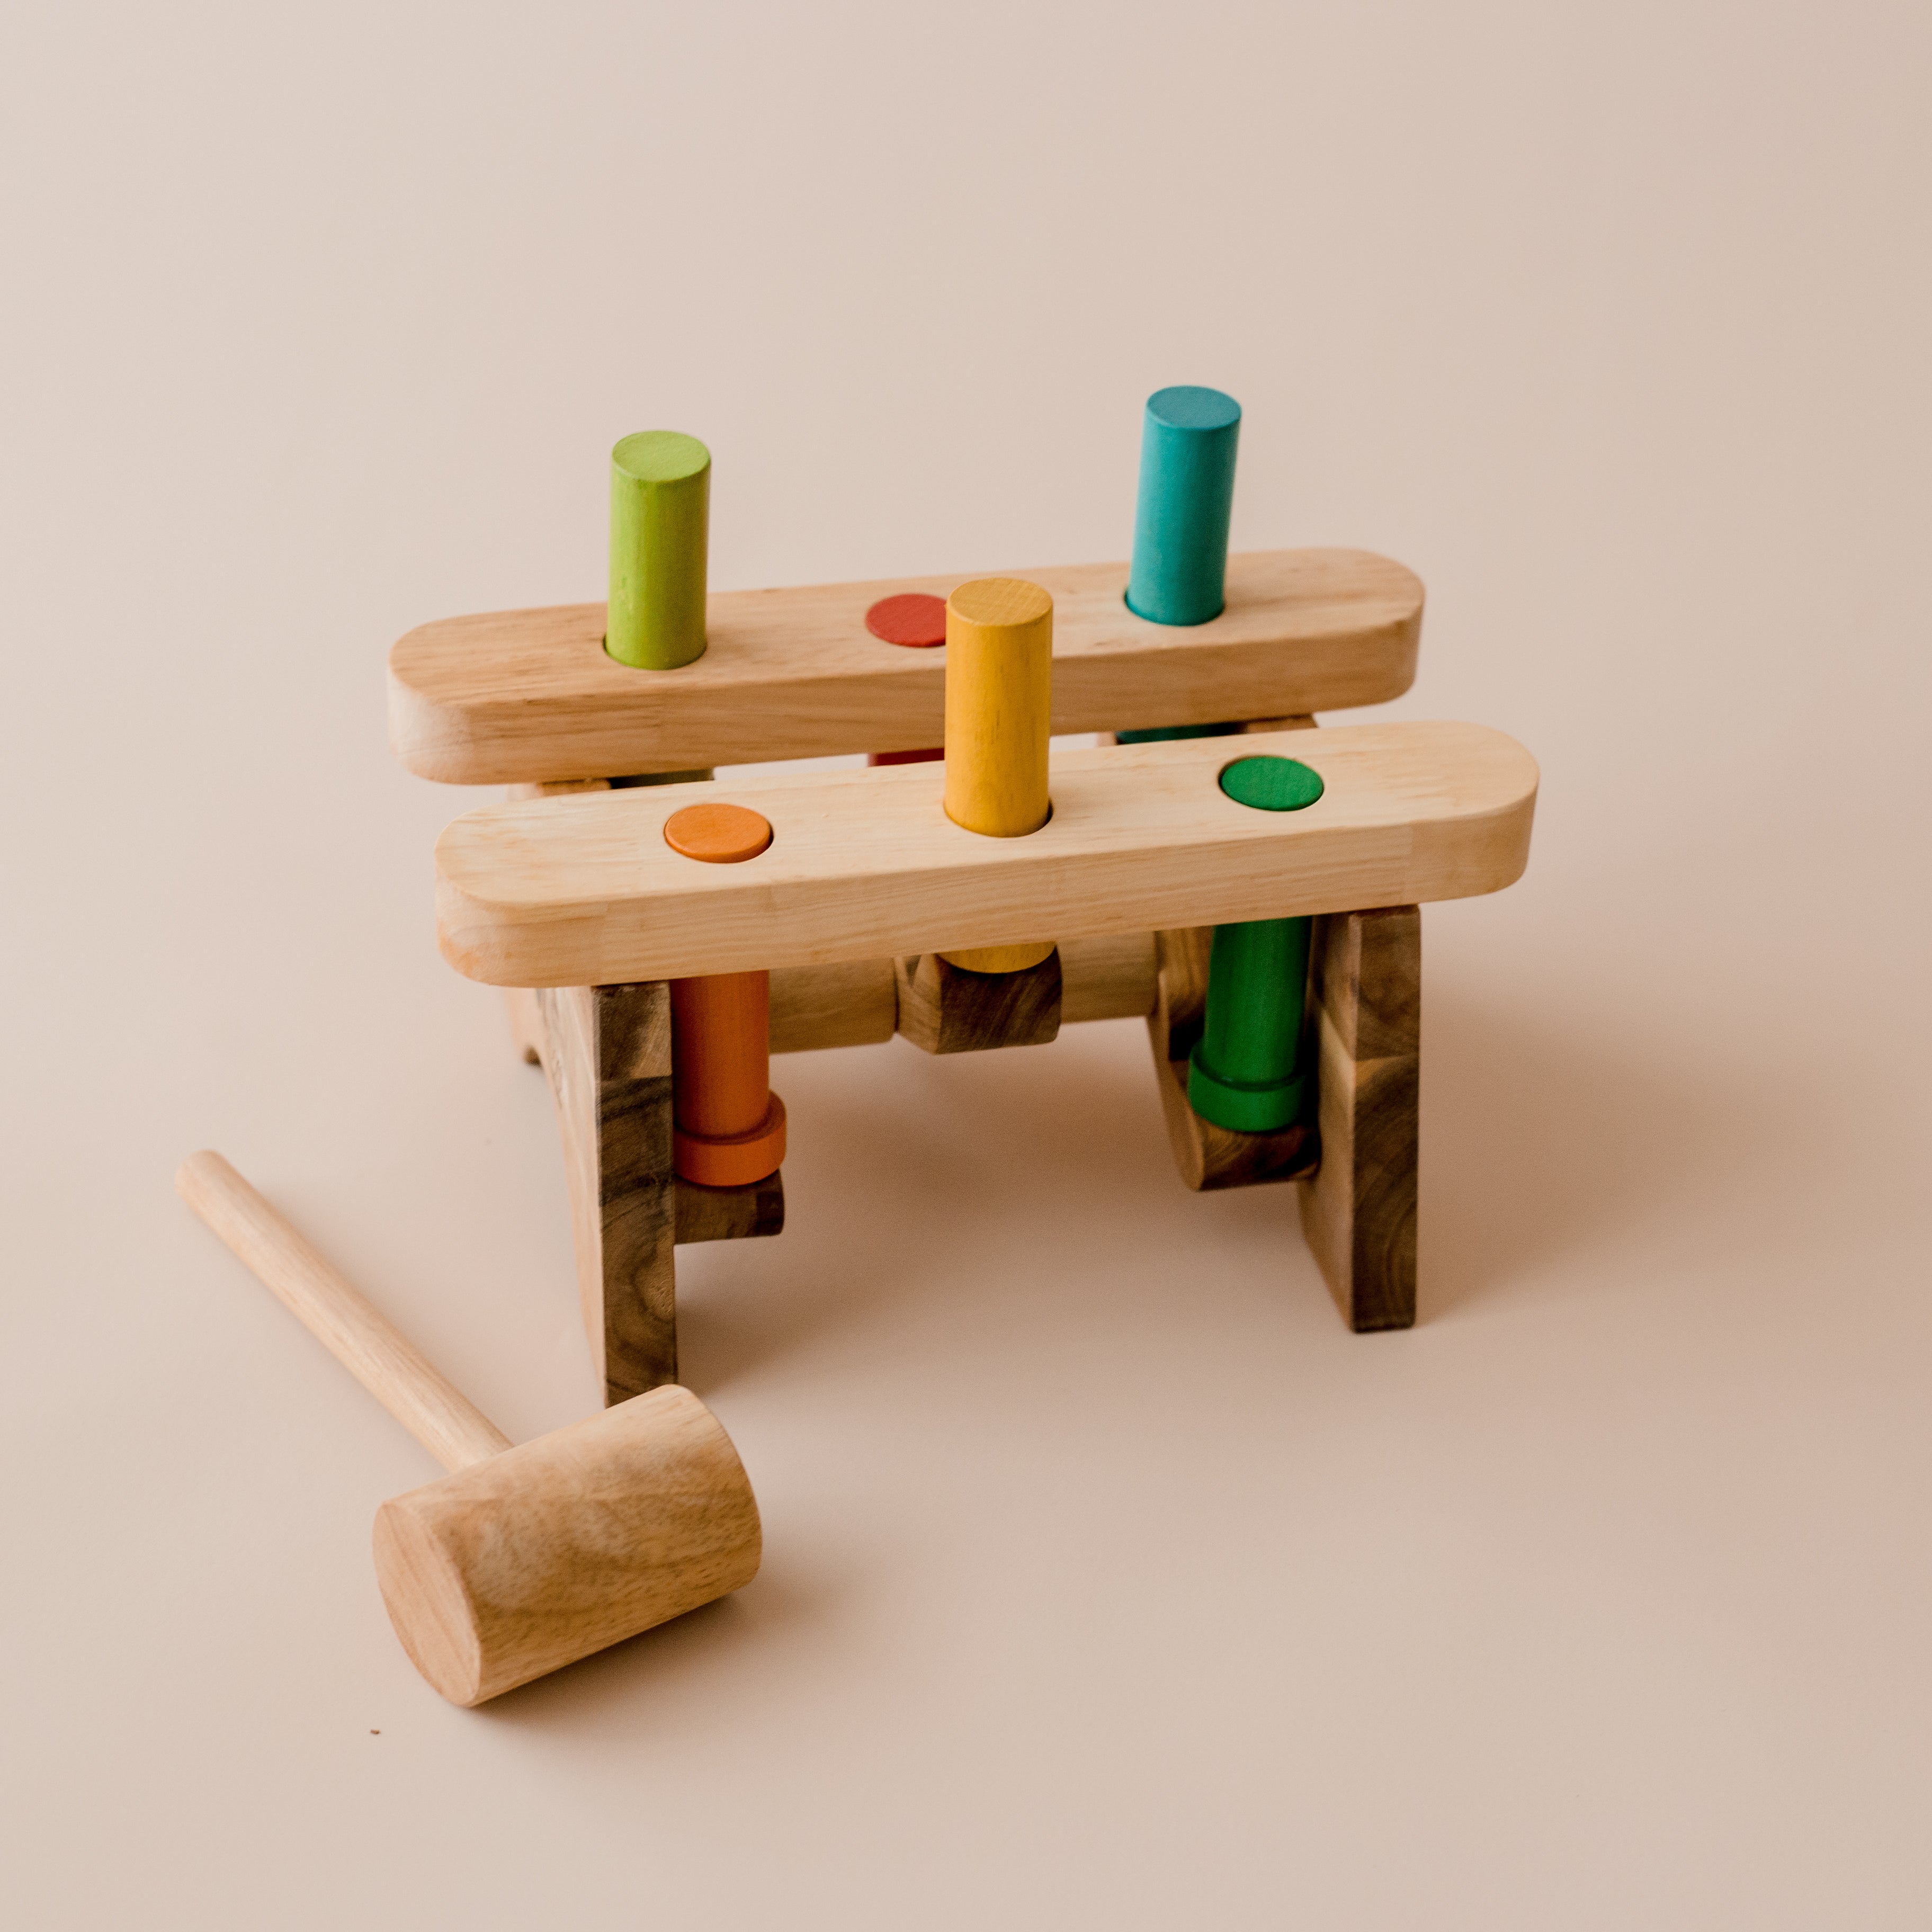 Beautiful Pound a Peg wooden hammer and peg toy from QToys. Pegs are in green, orange, blue, red and yellow. Pegs connected to one another so when one goes down the other goes up.